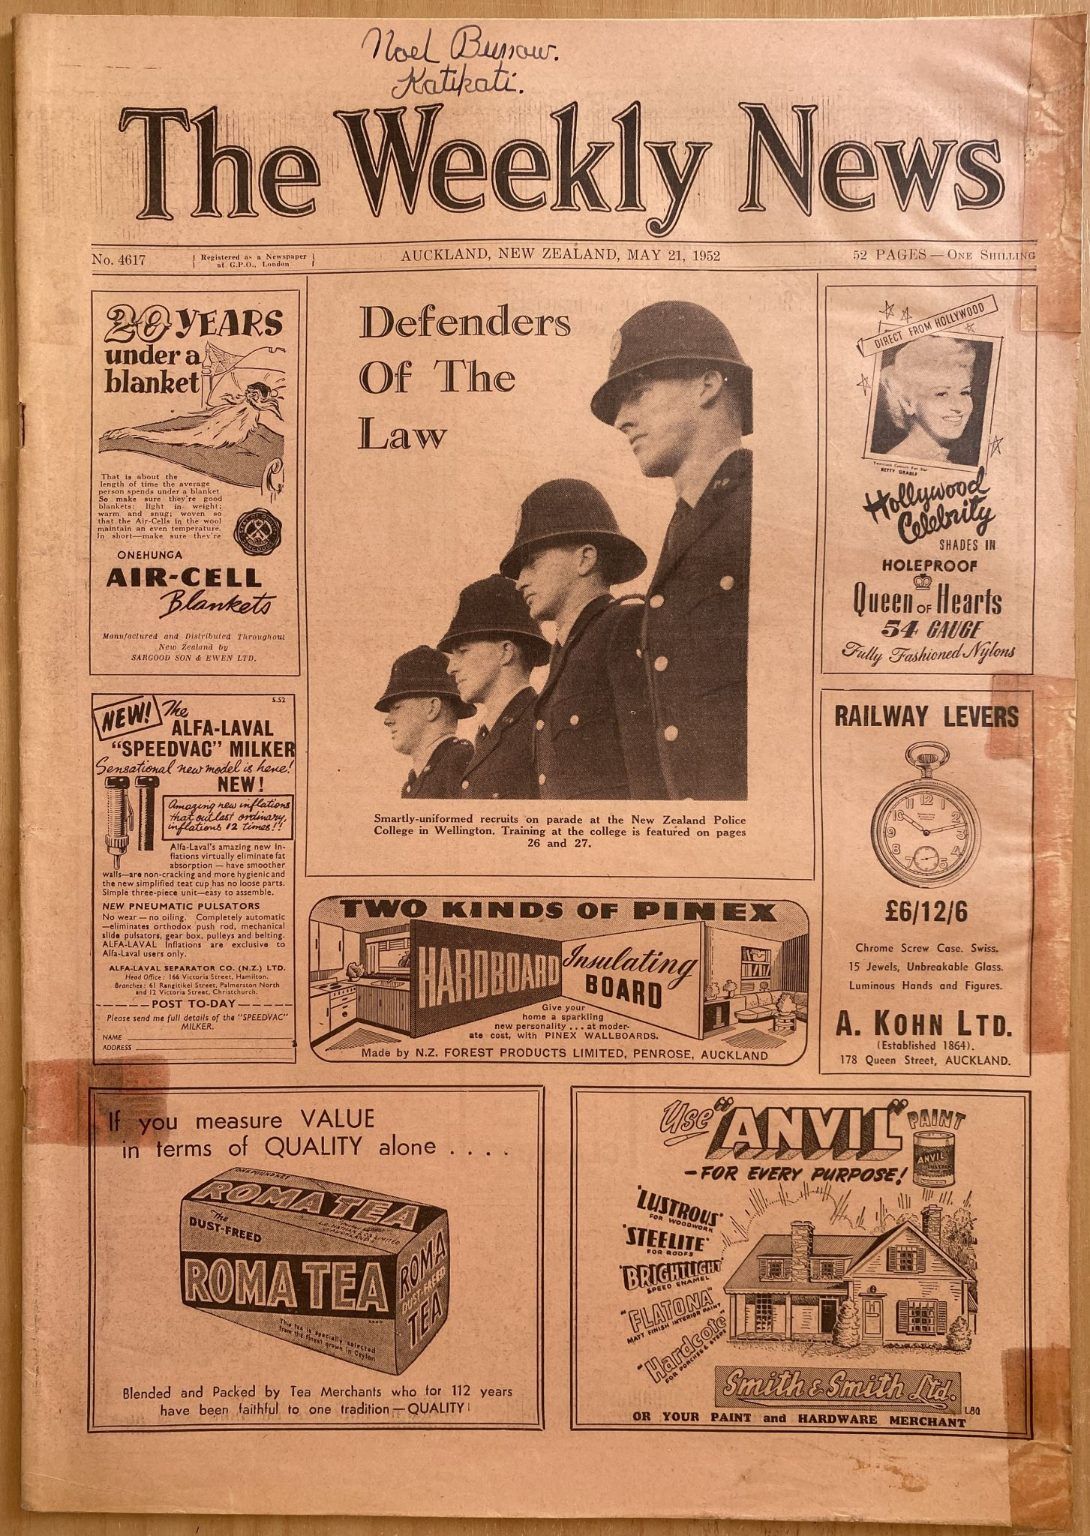 OLD NEWSPAPER: The Weekly News - No. 4617, 21 May 1952